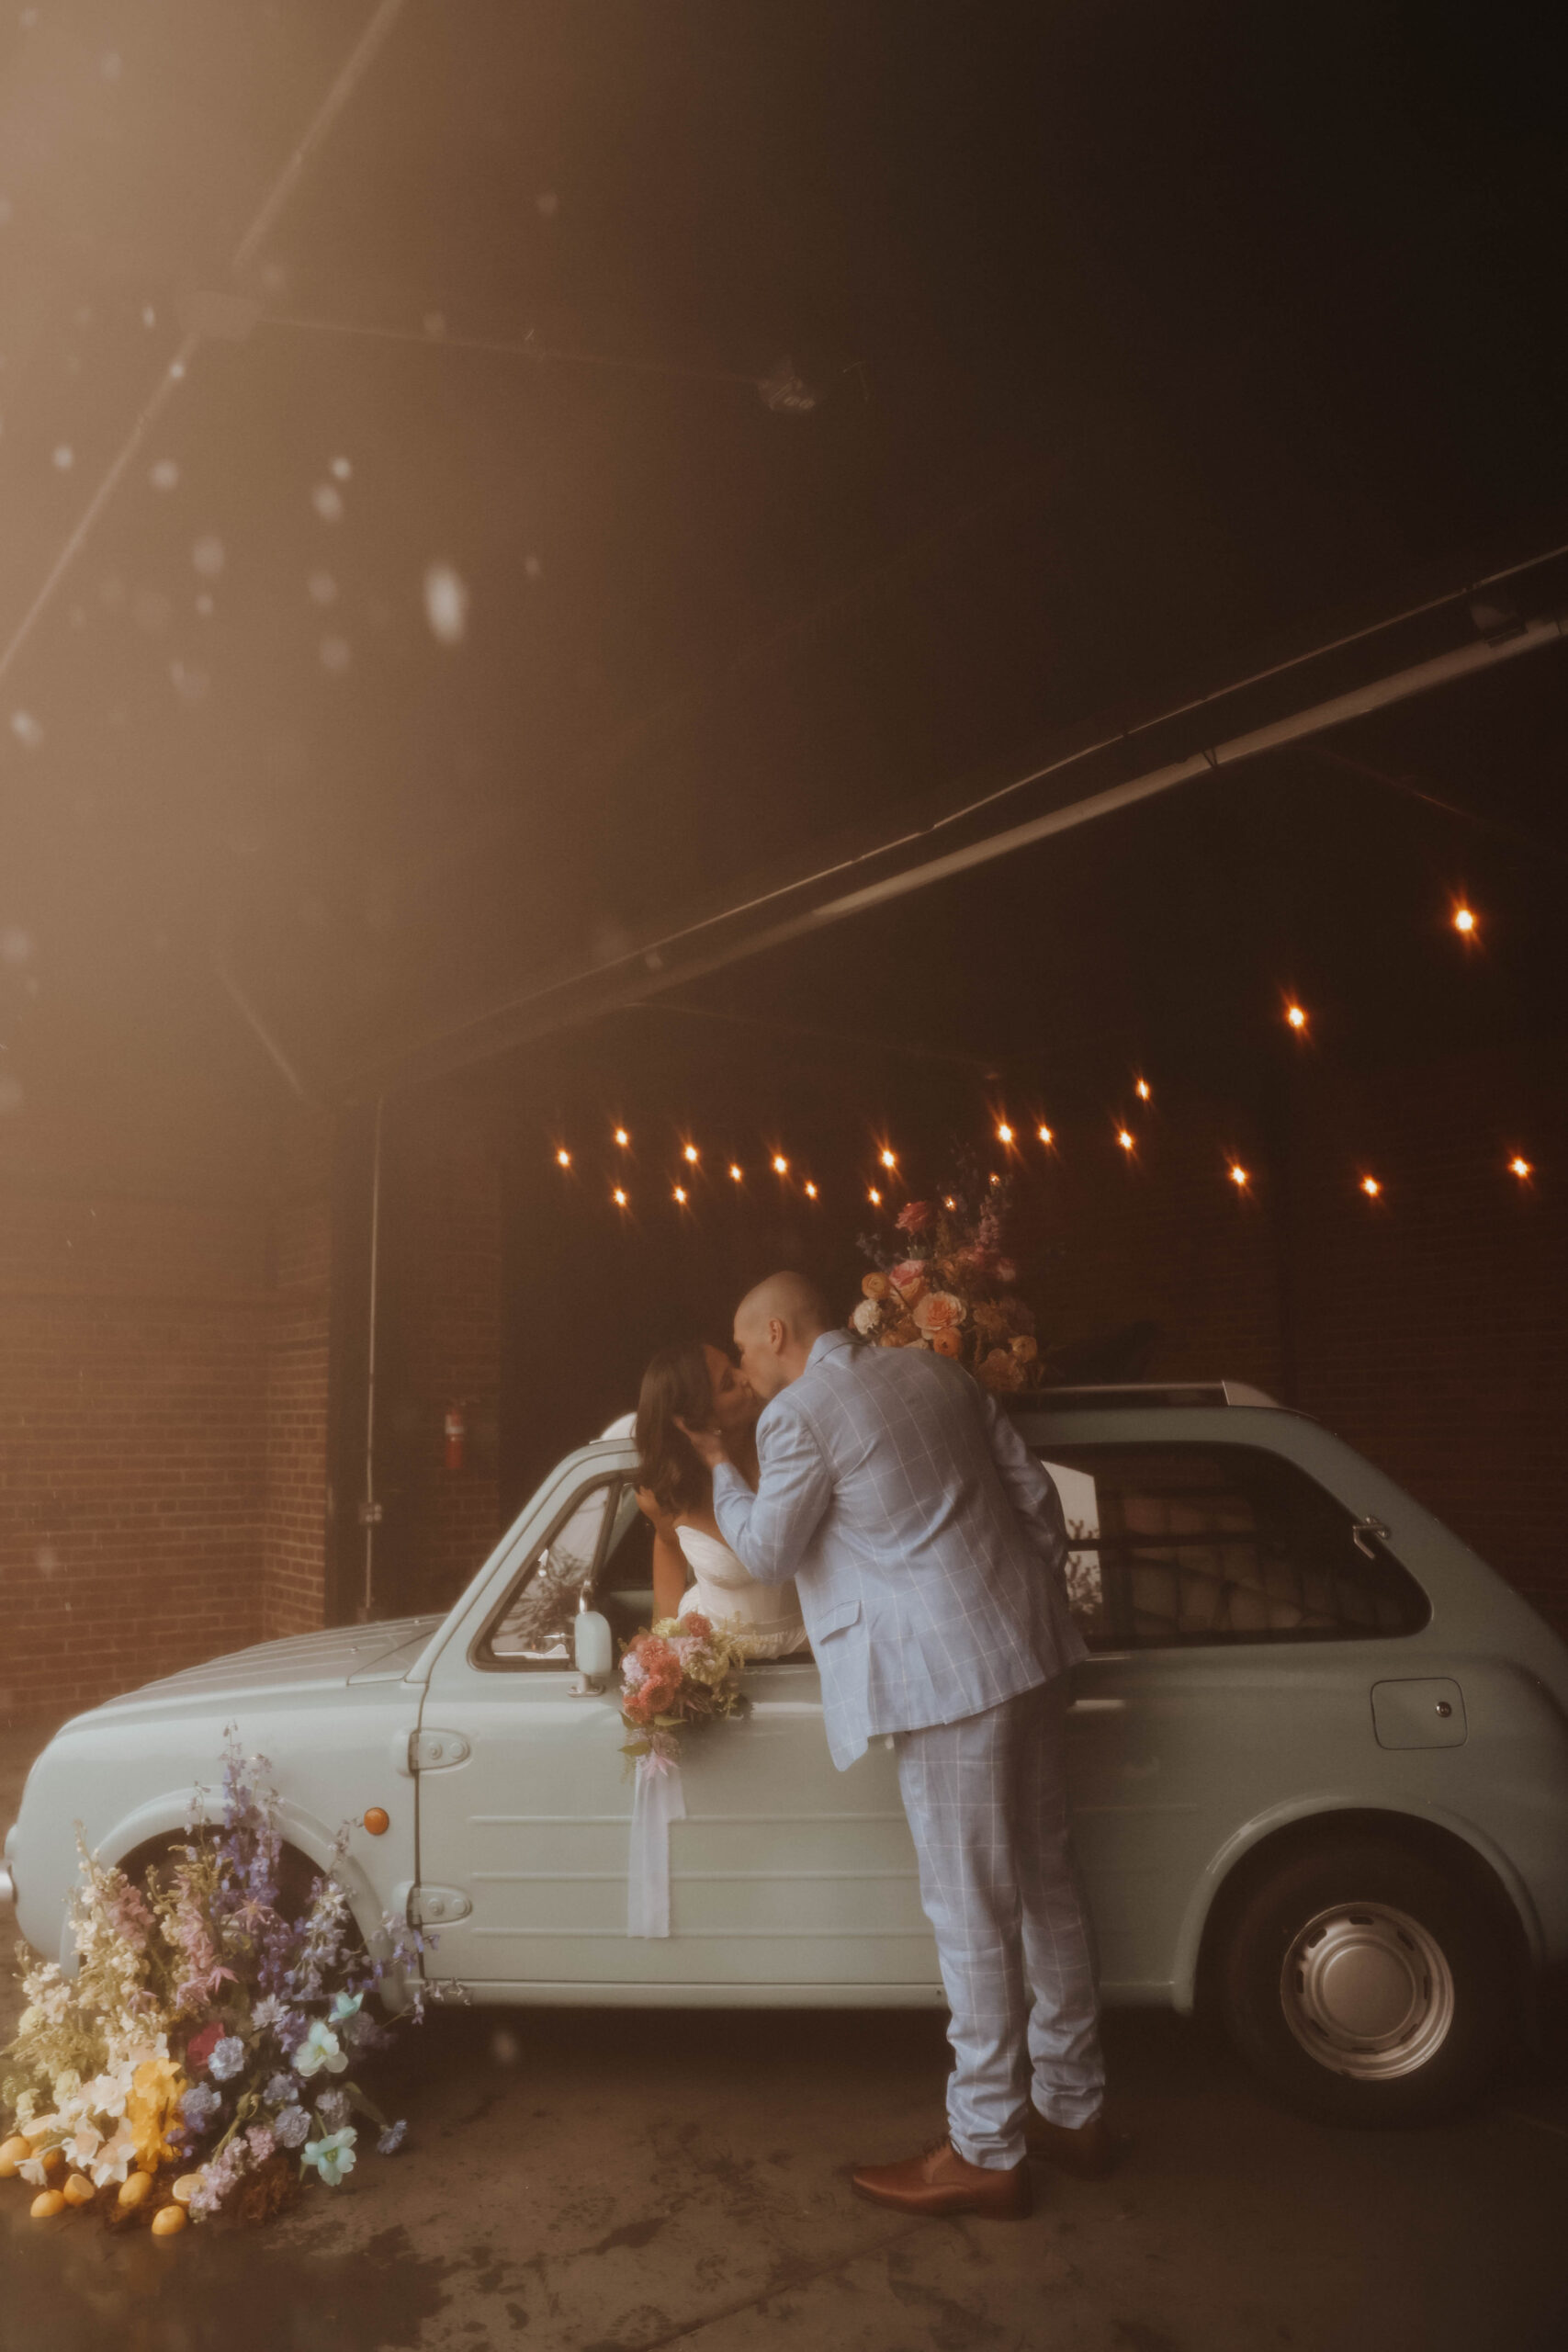 vintage looking photo of brie and groom kissing through the window of the car